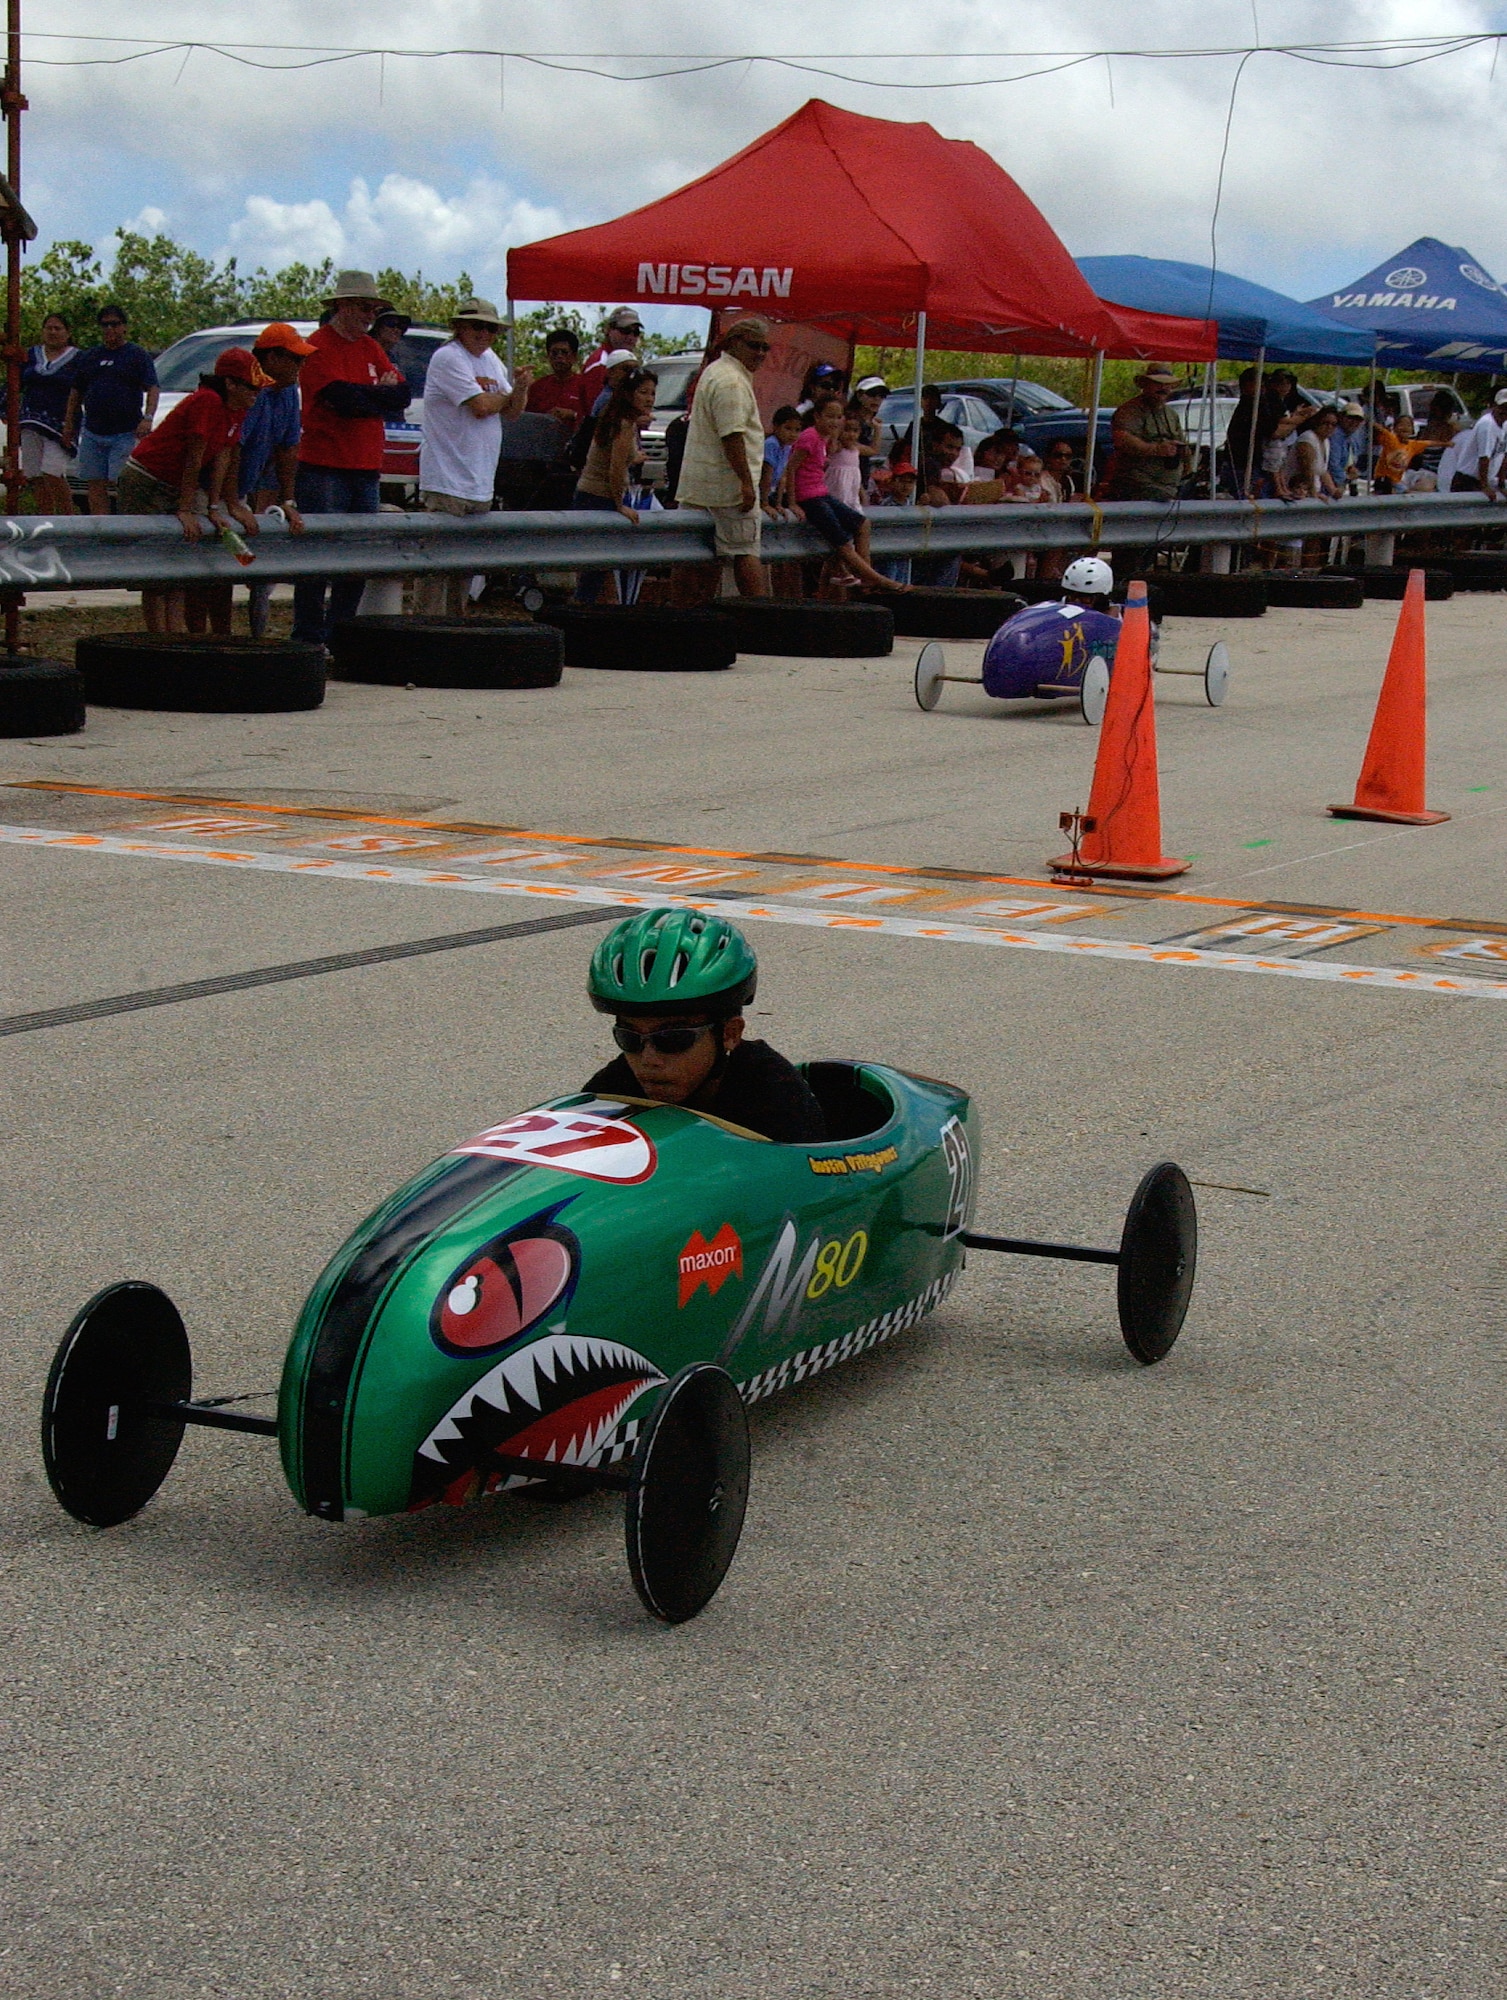 ANDERSEN AIR FORCE BASE, Guam -- The No. 27 Maxon soap box car races by the
Big Brother, Big Sister-sponsored car during the first round of races of the annual soap box derby held May 9 at the Yigo drag strip. (U.S. Air Force photo by Airman Carissa Wolff)
